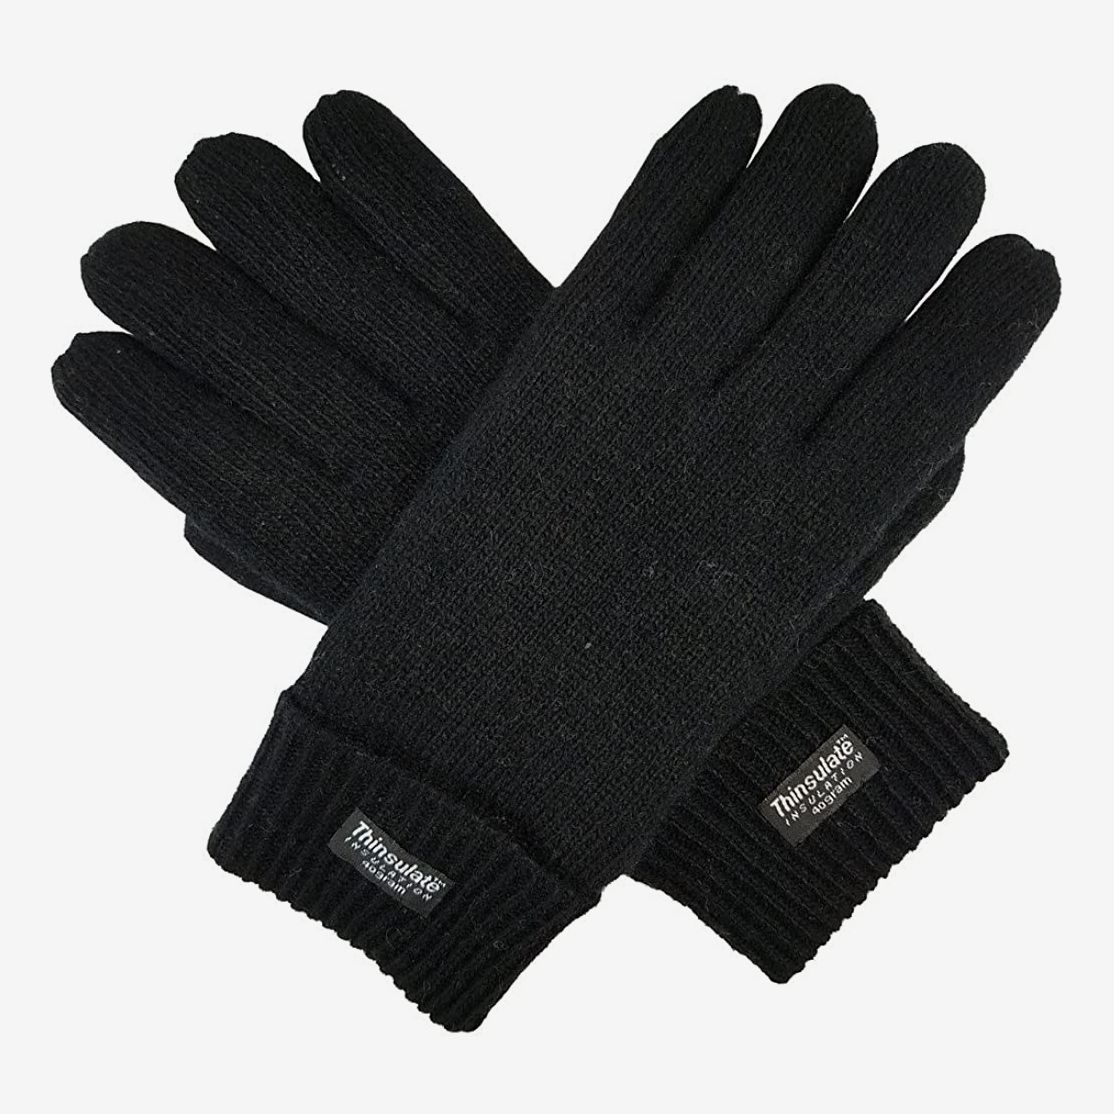 Kids 2 Pack Thermal Knitted Gloves Thinsulate Quality Knit Lined Glove